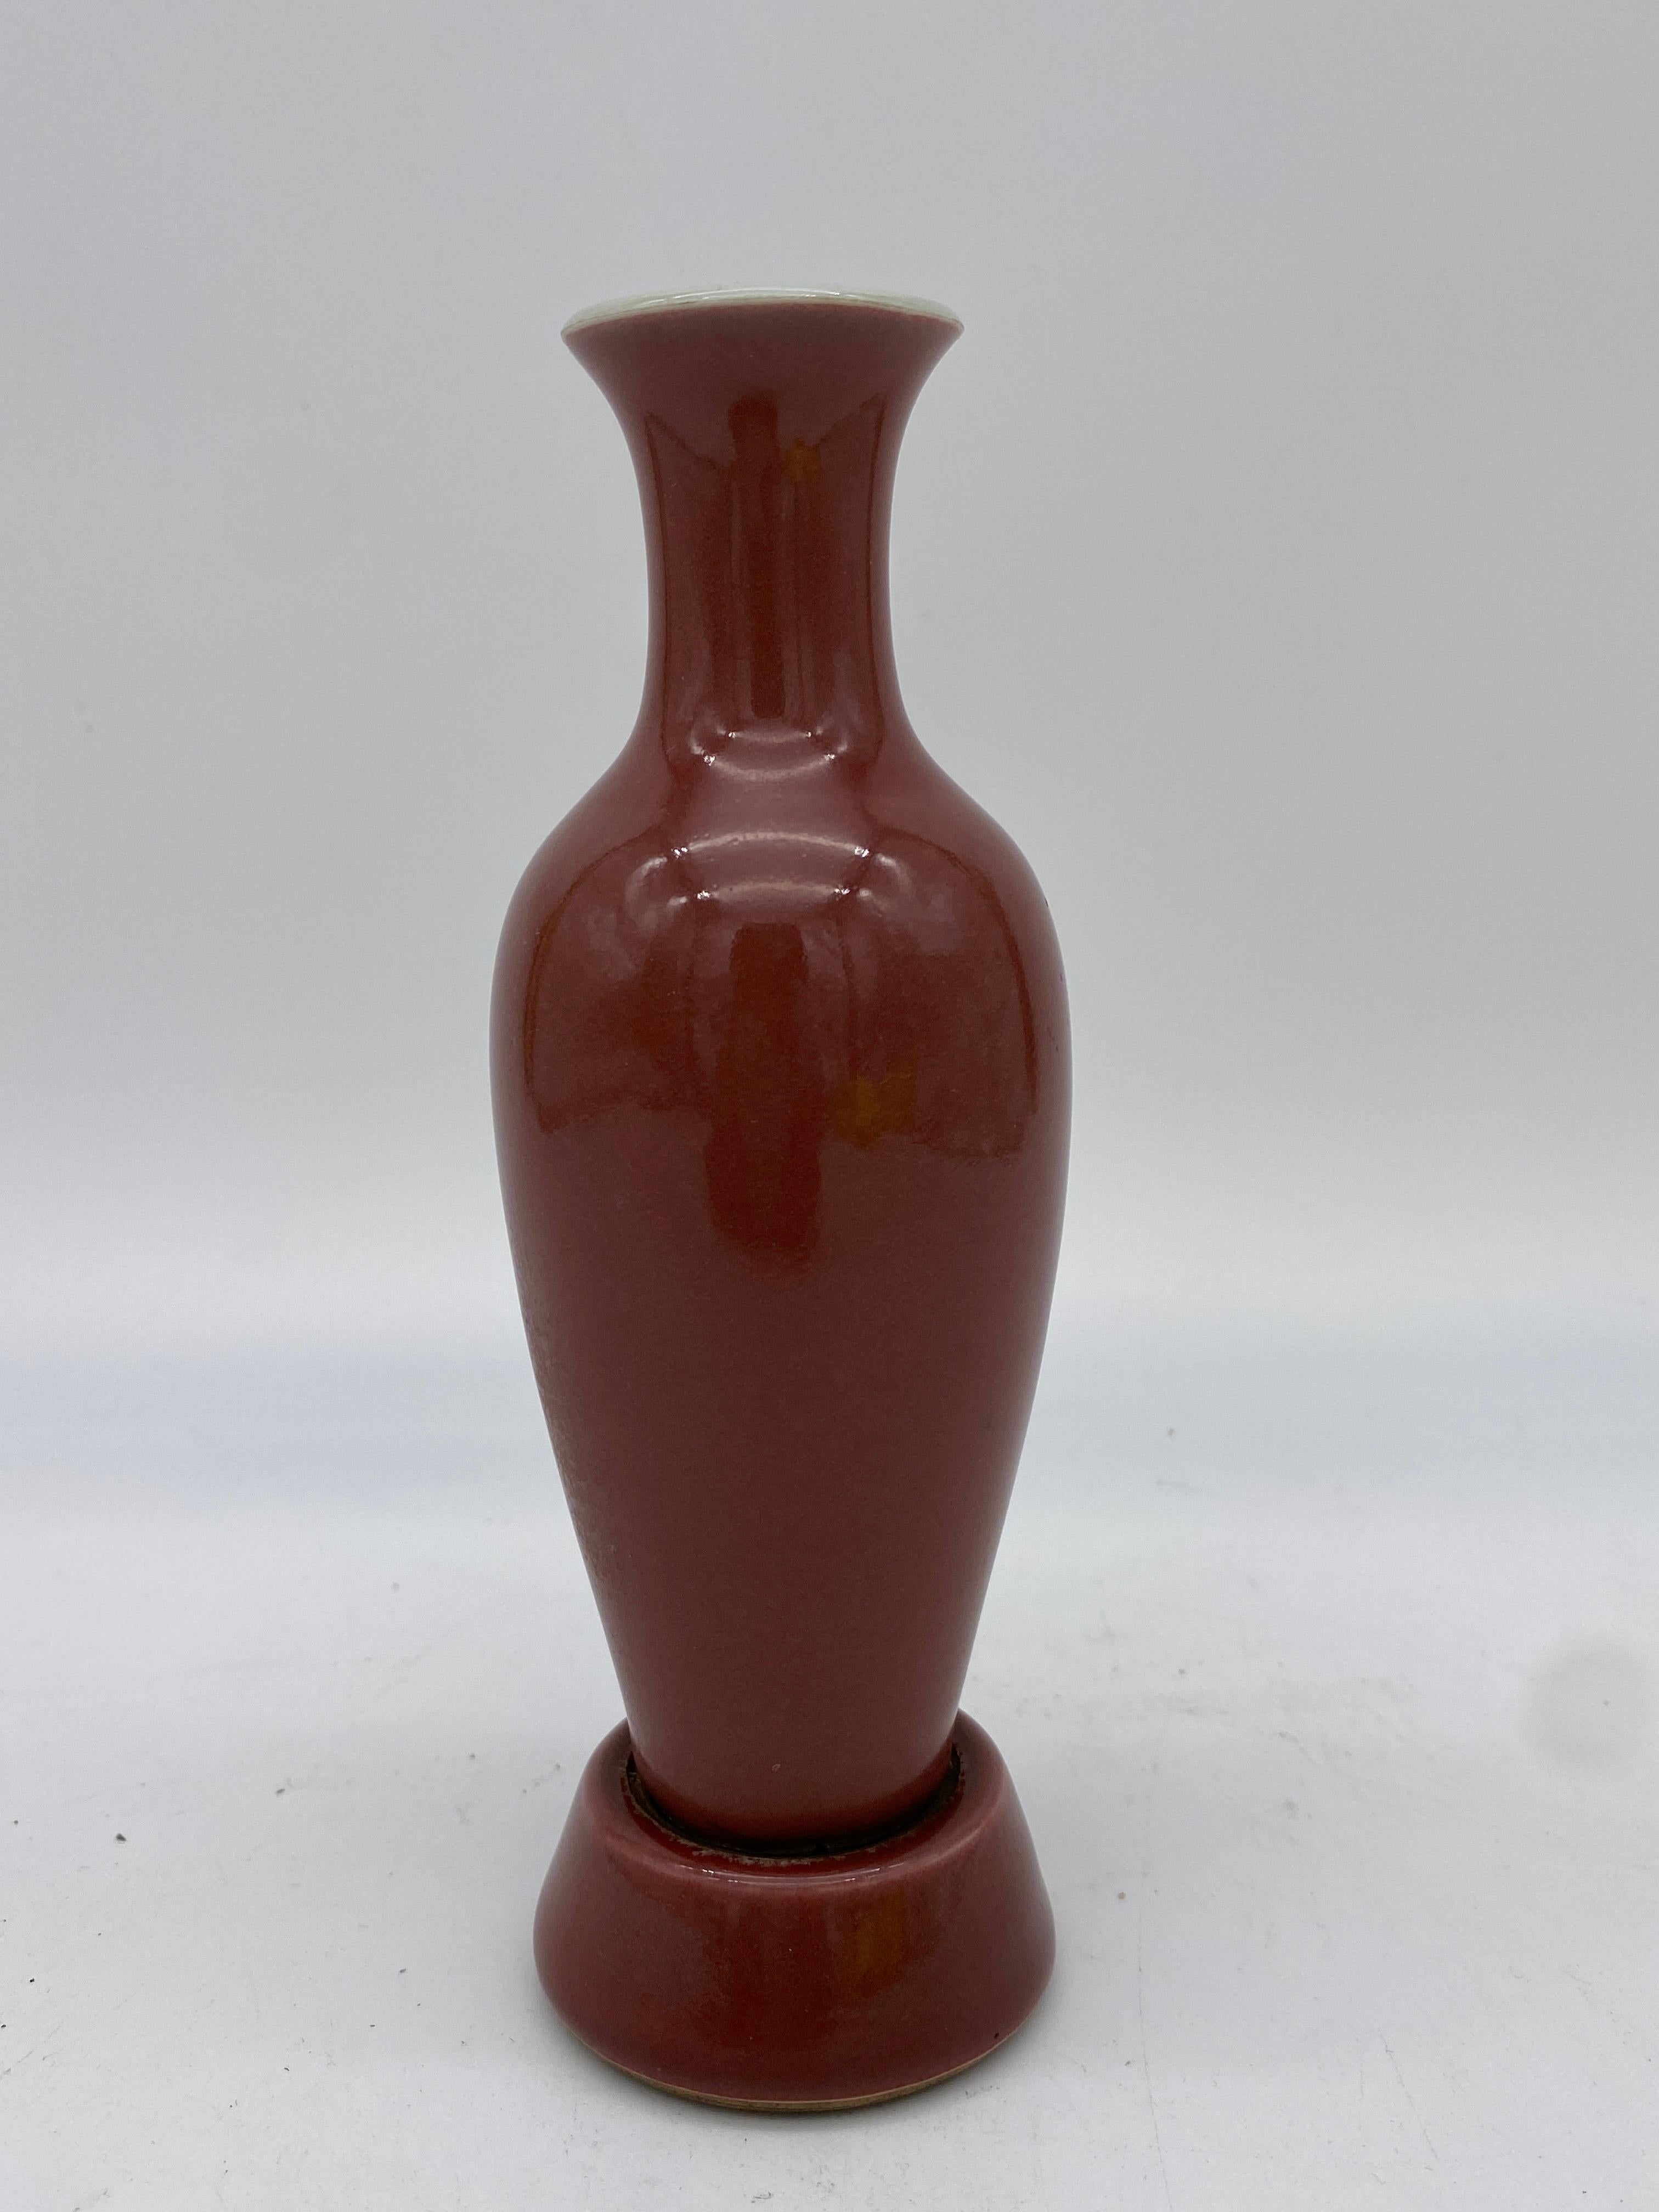 Qing dynasty an antique important Chinese red glazed porcelain vase with porcelain stand, GuangXu Mark and of the period. Measures: 6.5” height 2.15 '' diameter, see carefully more pictures.